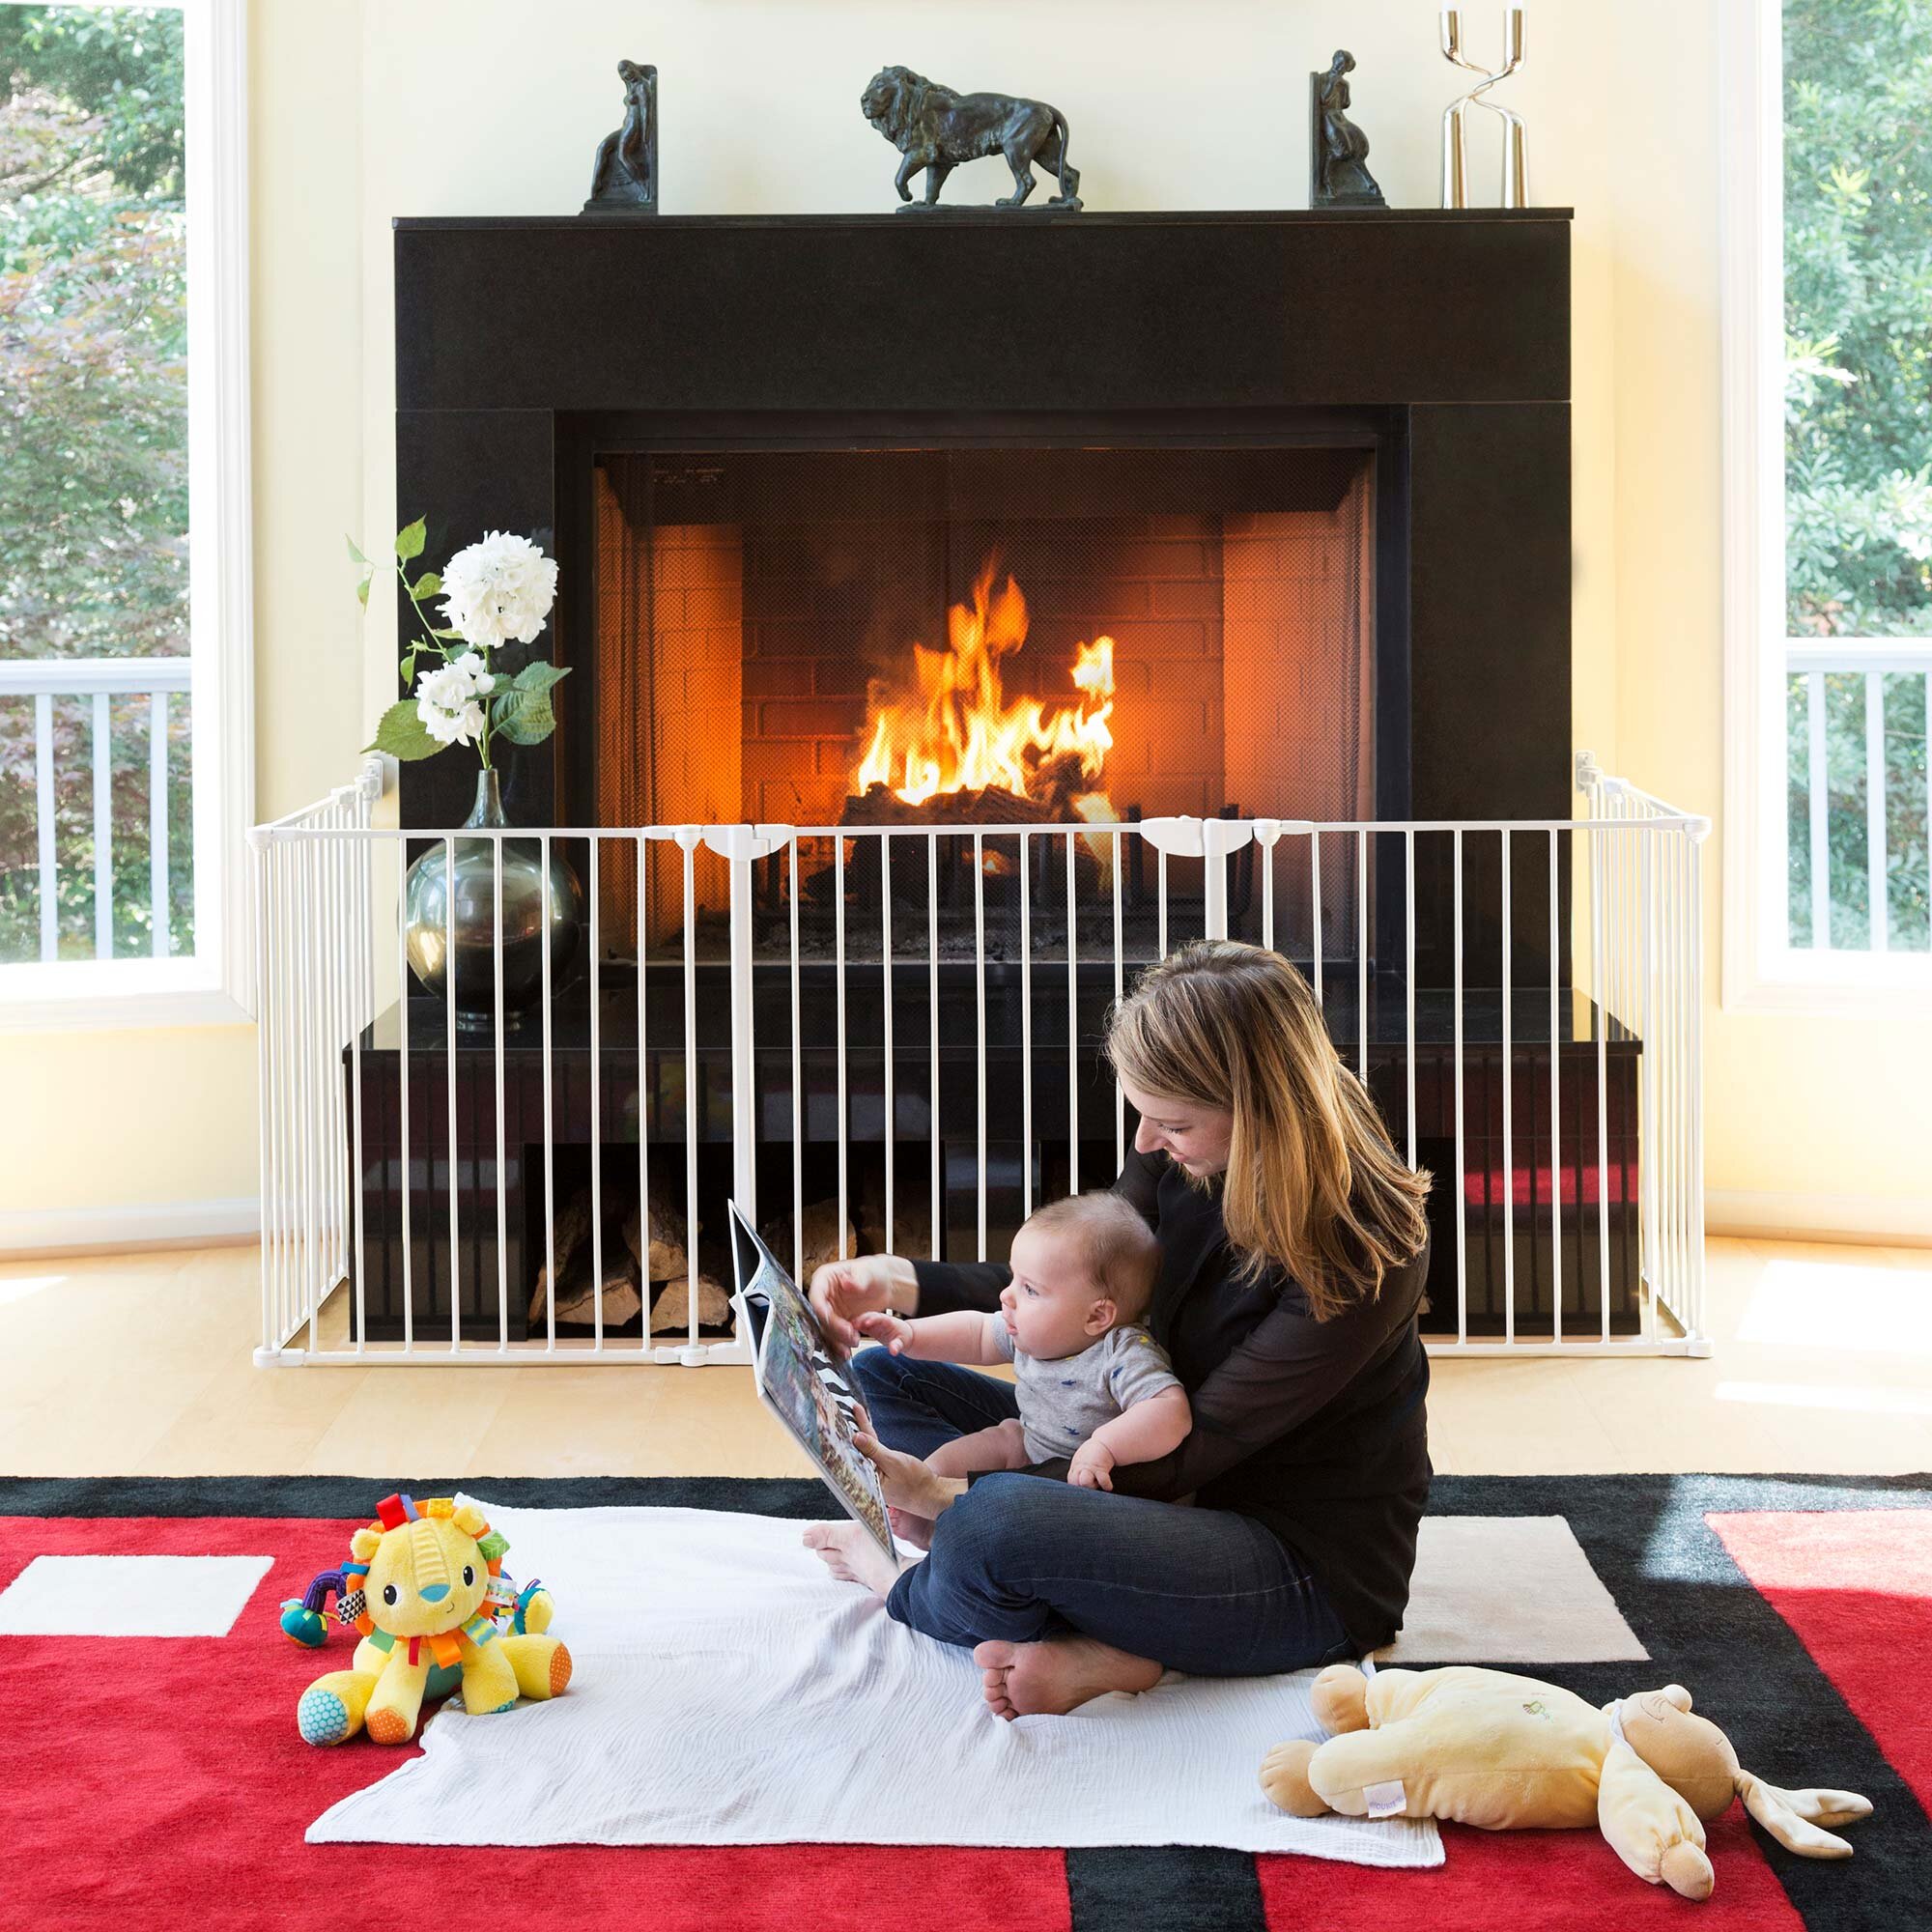 Construct-a-Safegate protecting mother and child from fireplace